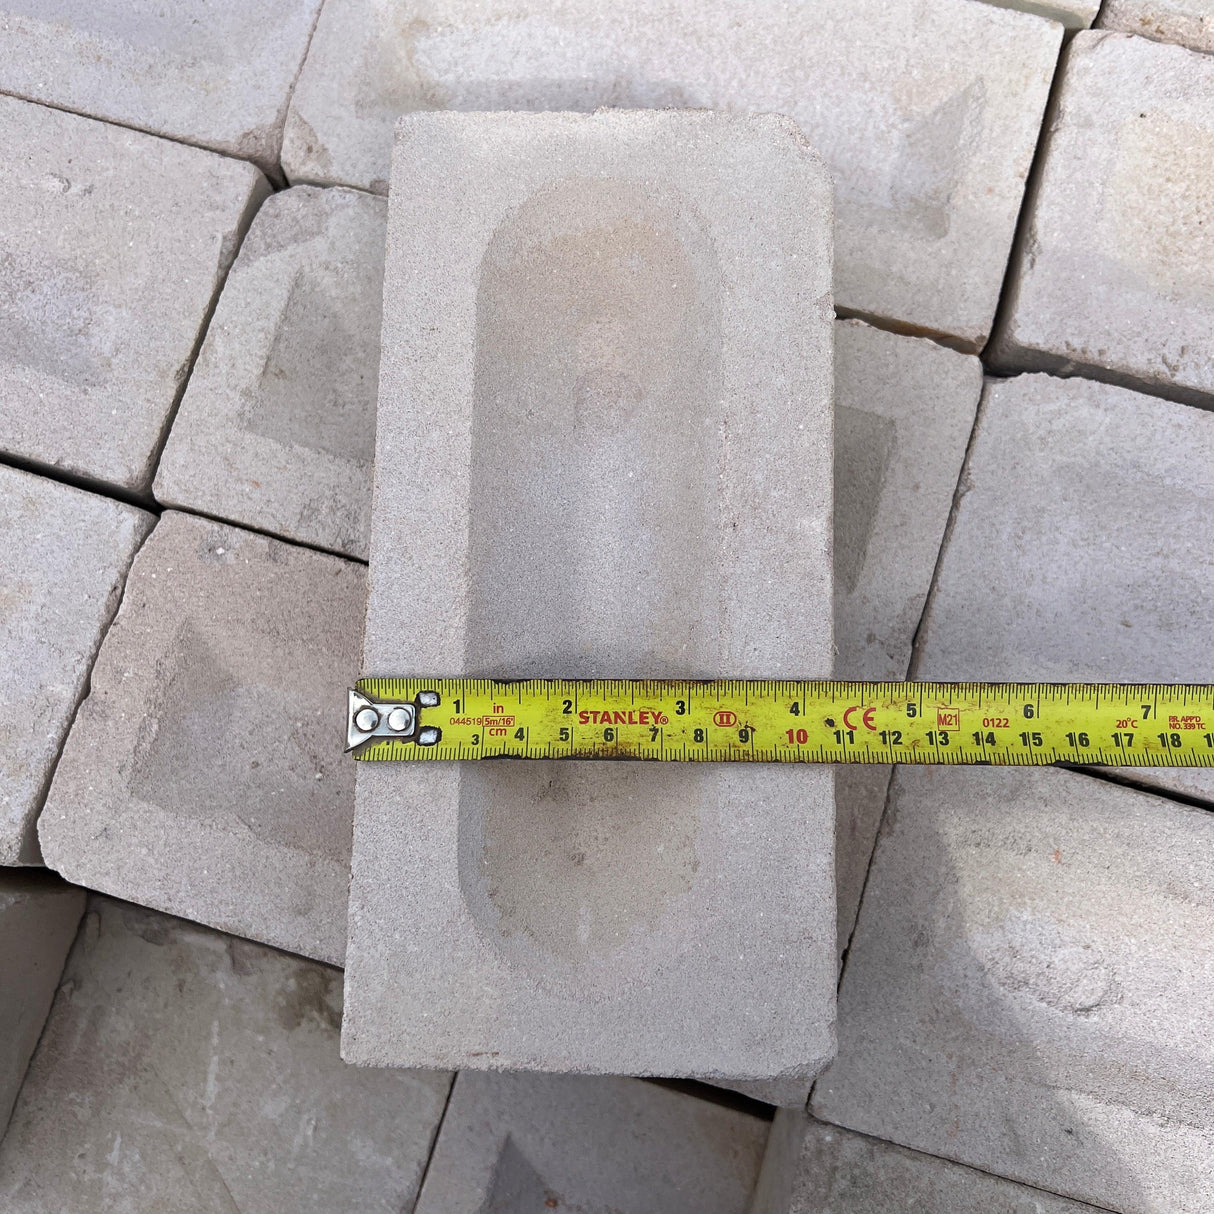 Reclaimed White Imperial Bricks | Pack of 250 Bricks | Free Delivery - Reclaimed Brick Company